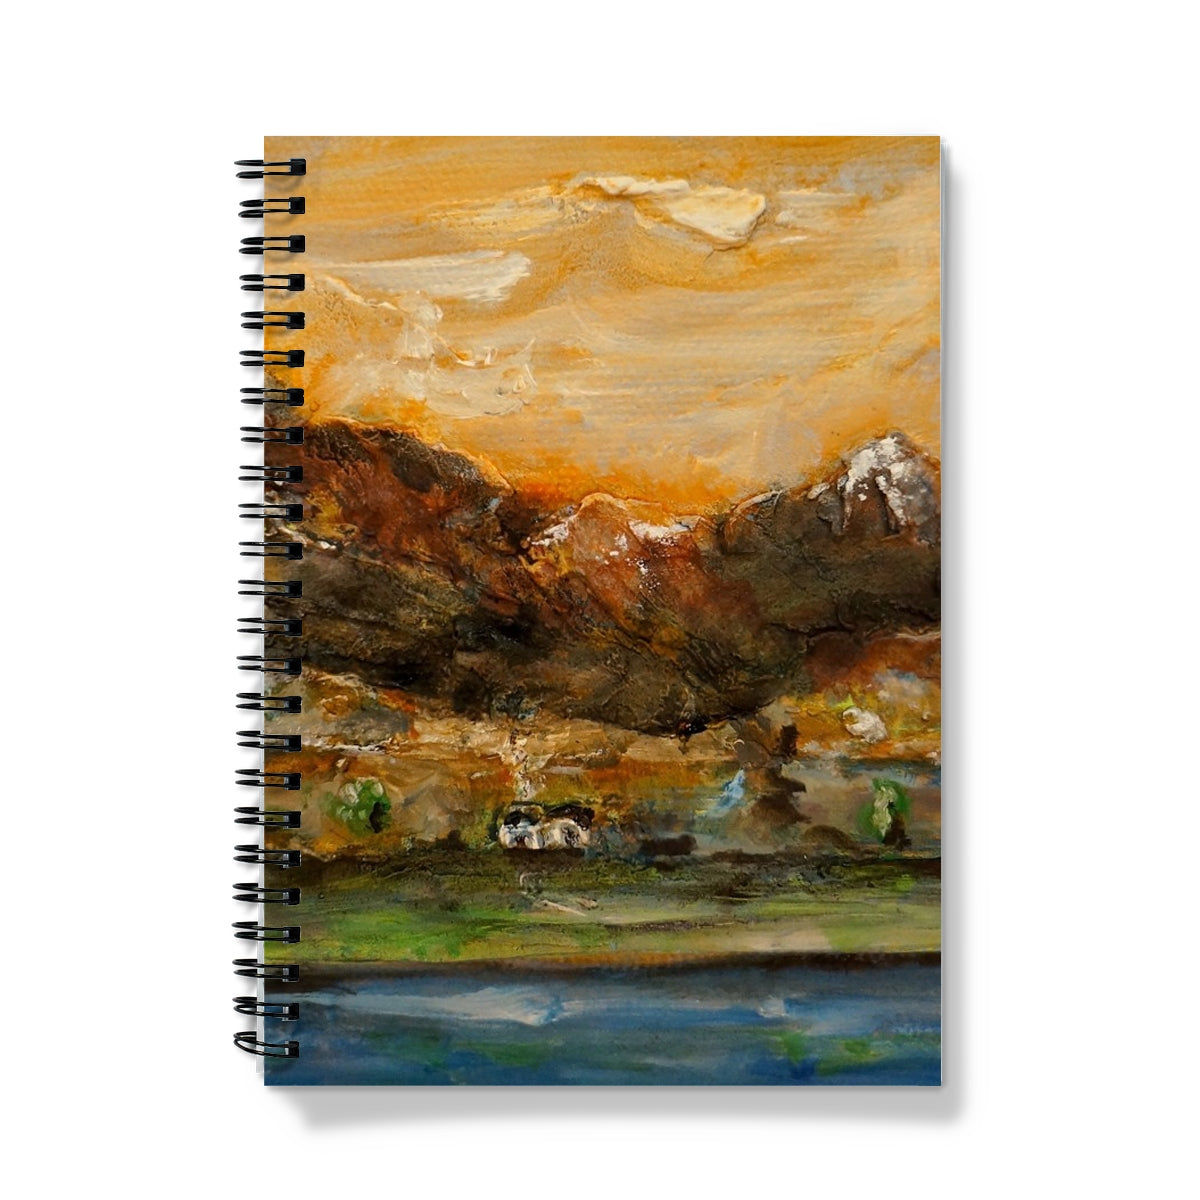 A Glencoe Cottage Art Gifts Notebook-Journals & Notebooks-Glencoe Art Gallery-A5-Graph-Paintings, Prints, Homeware, Art Gifts From Scotland By Scottish Artist Kevin Hunter